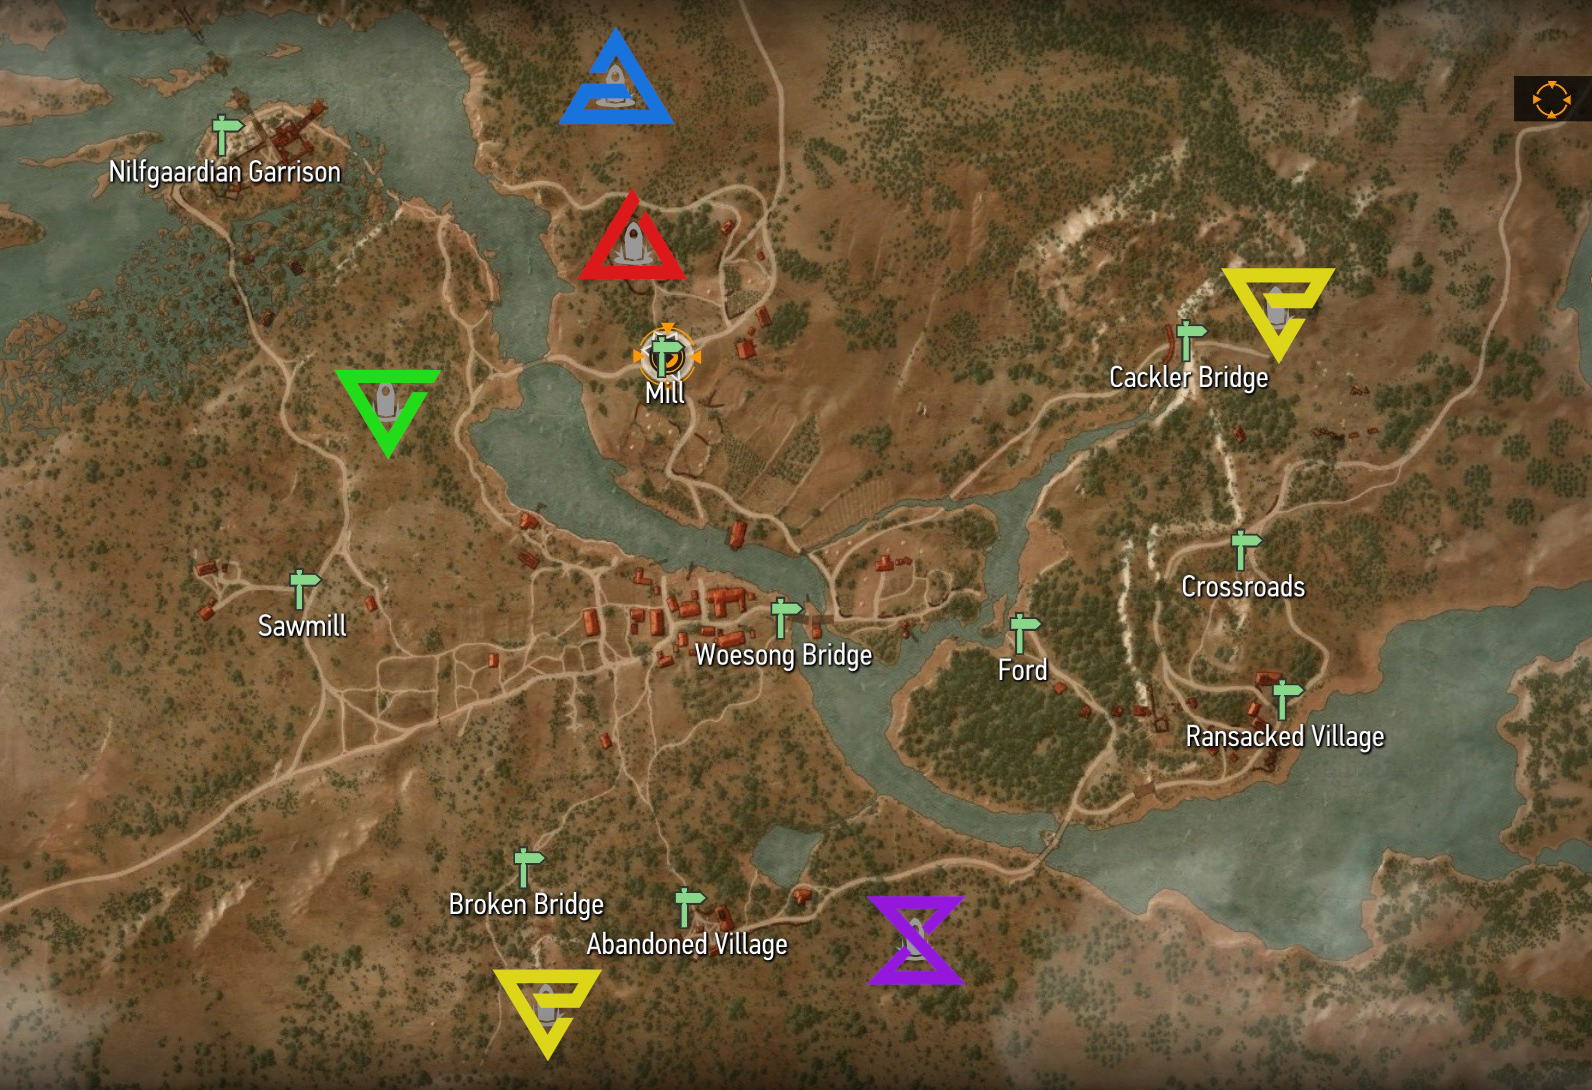 The Witcher 3 - An annotated map of White Orchard showing places of power as written below in text.